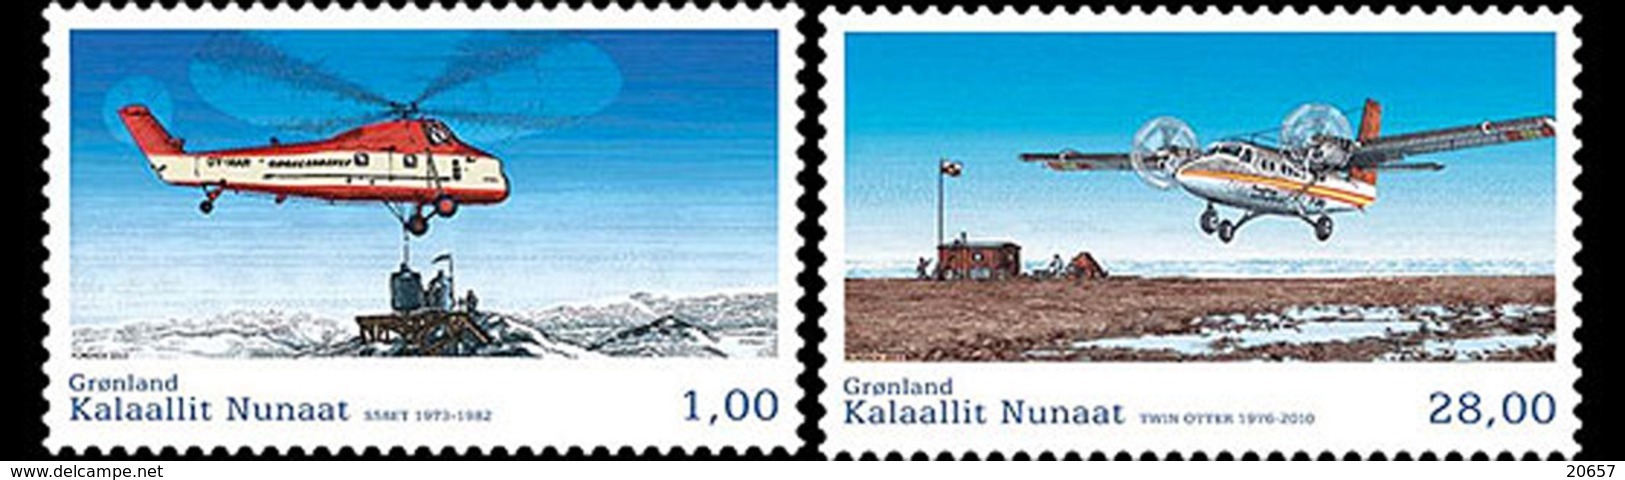 Danmark Gronland 0627/28 Avion, Hélicoptère - Scientific Stations & Arctic Drifting Stations